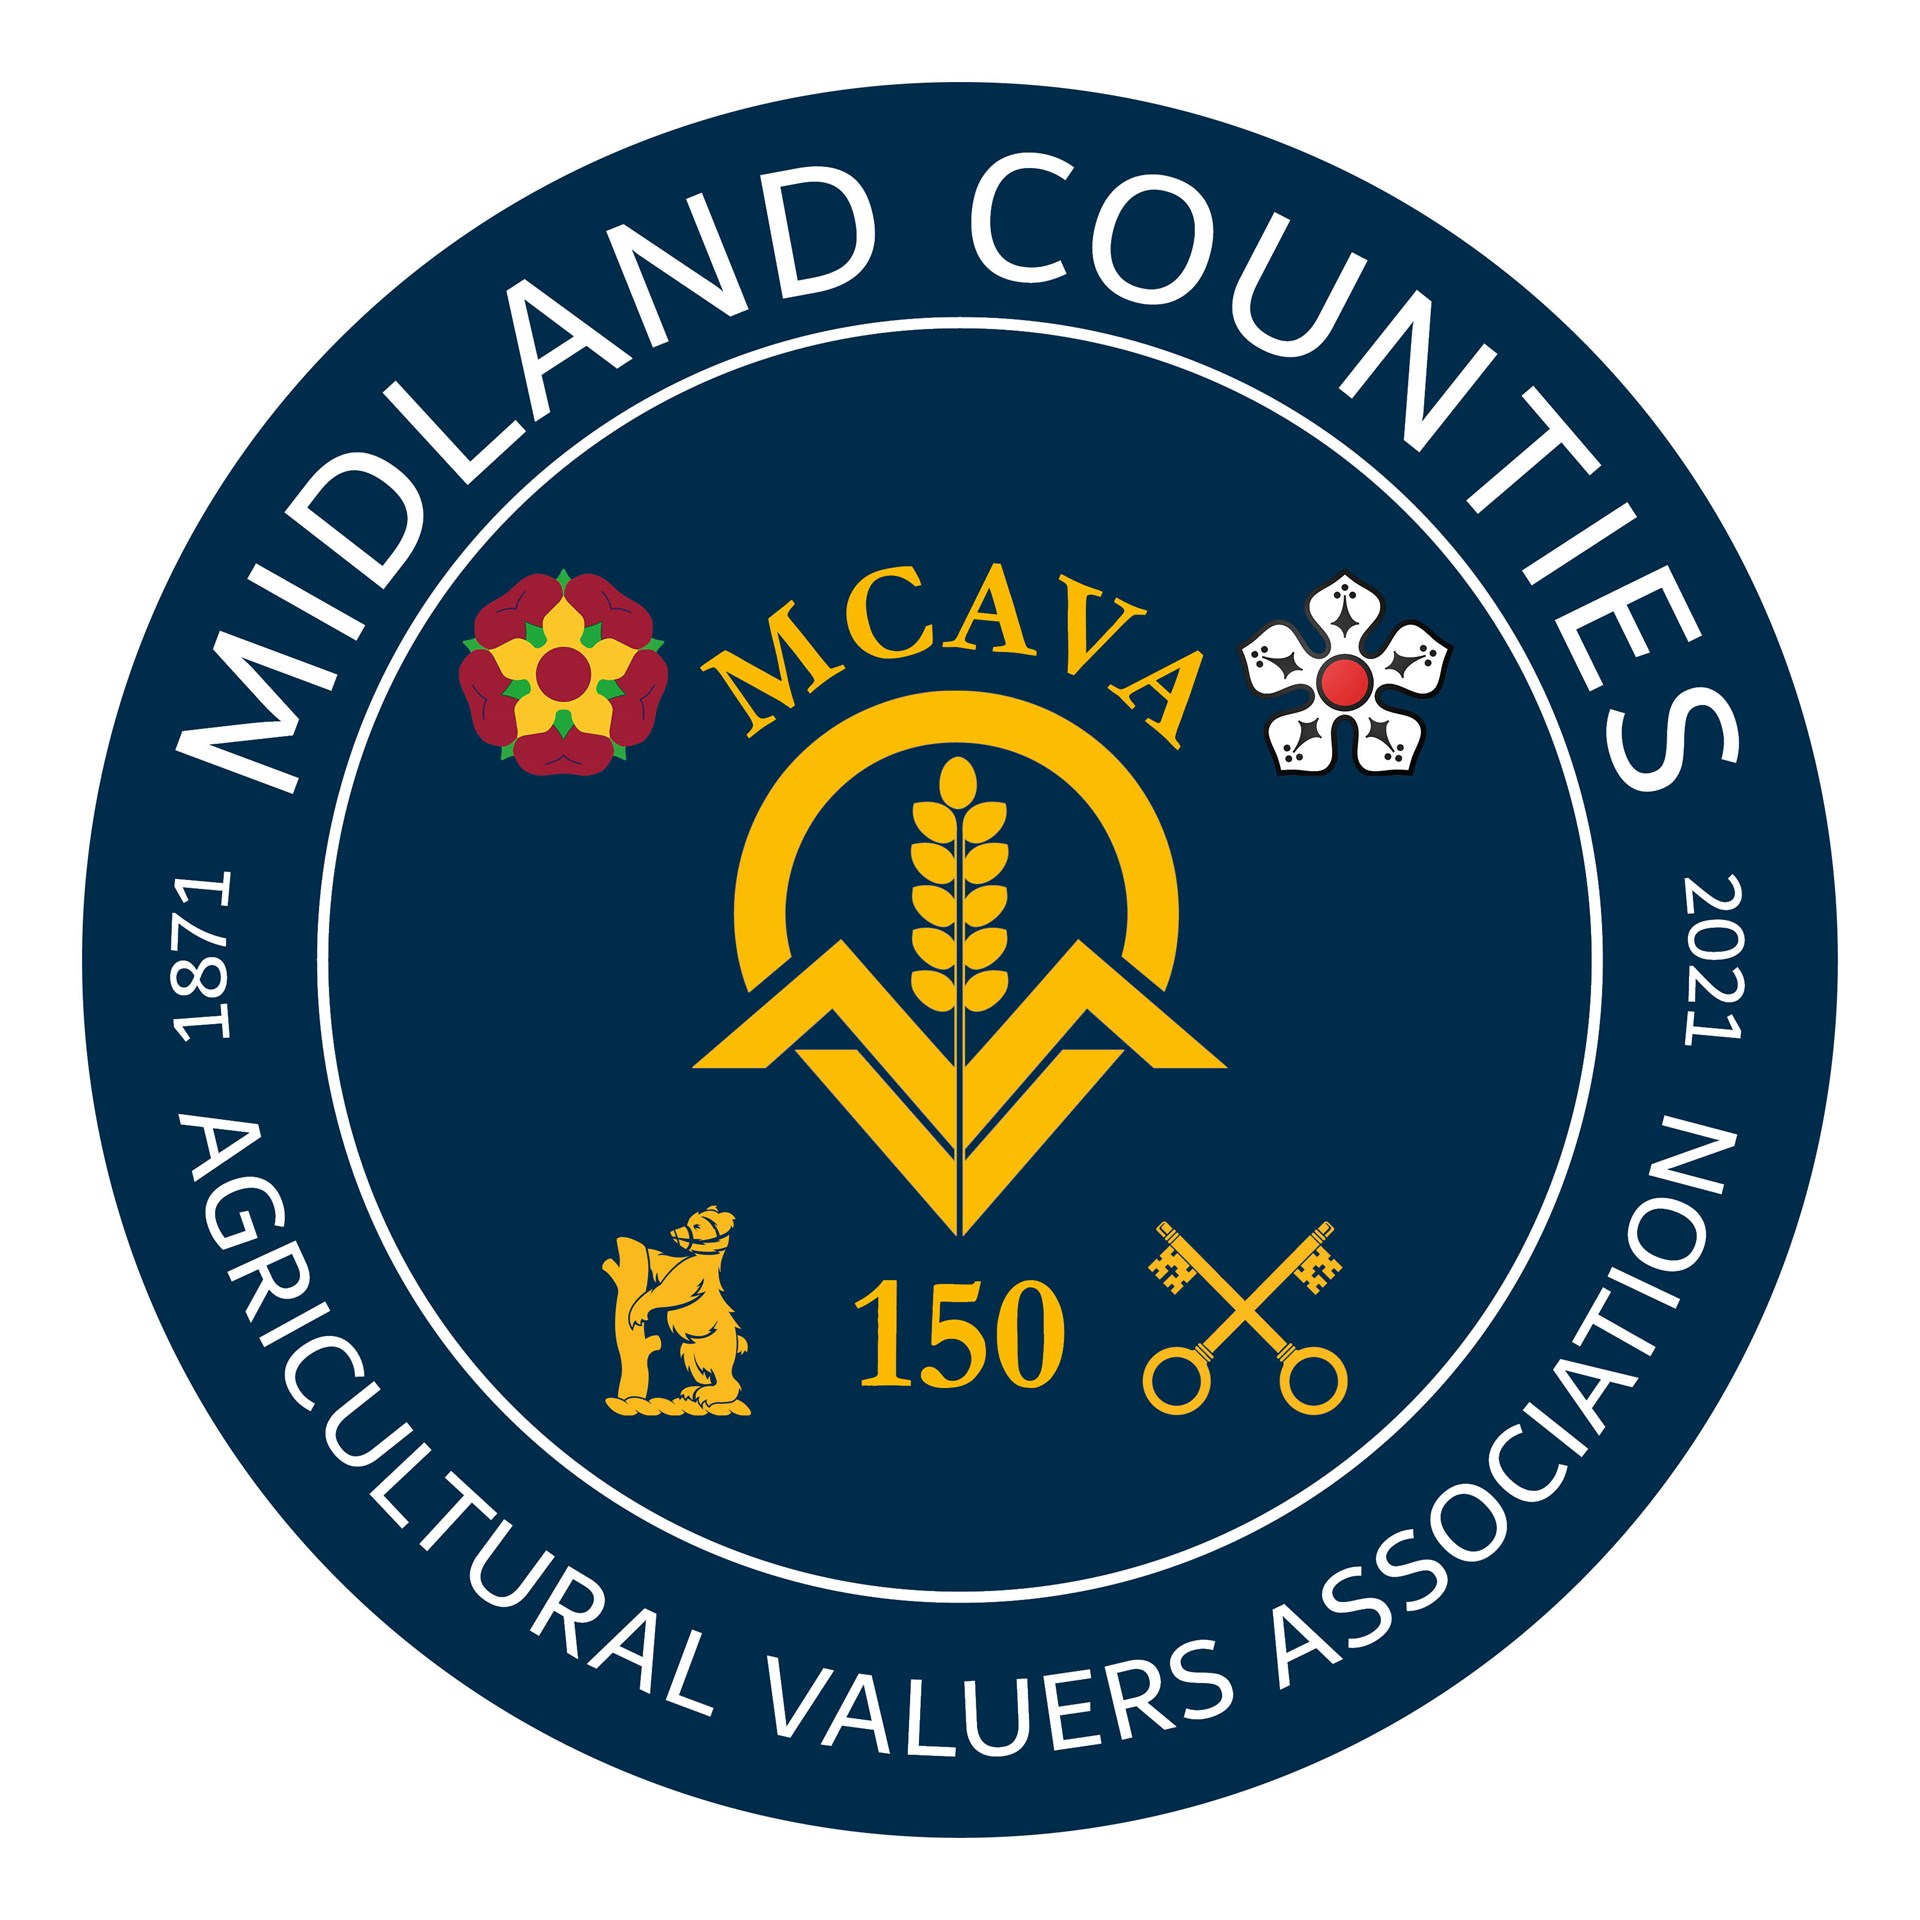 Midland Counties Agricultural Valuers' Association Home